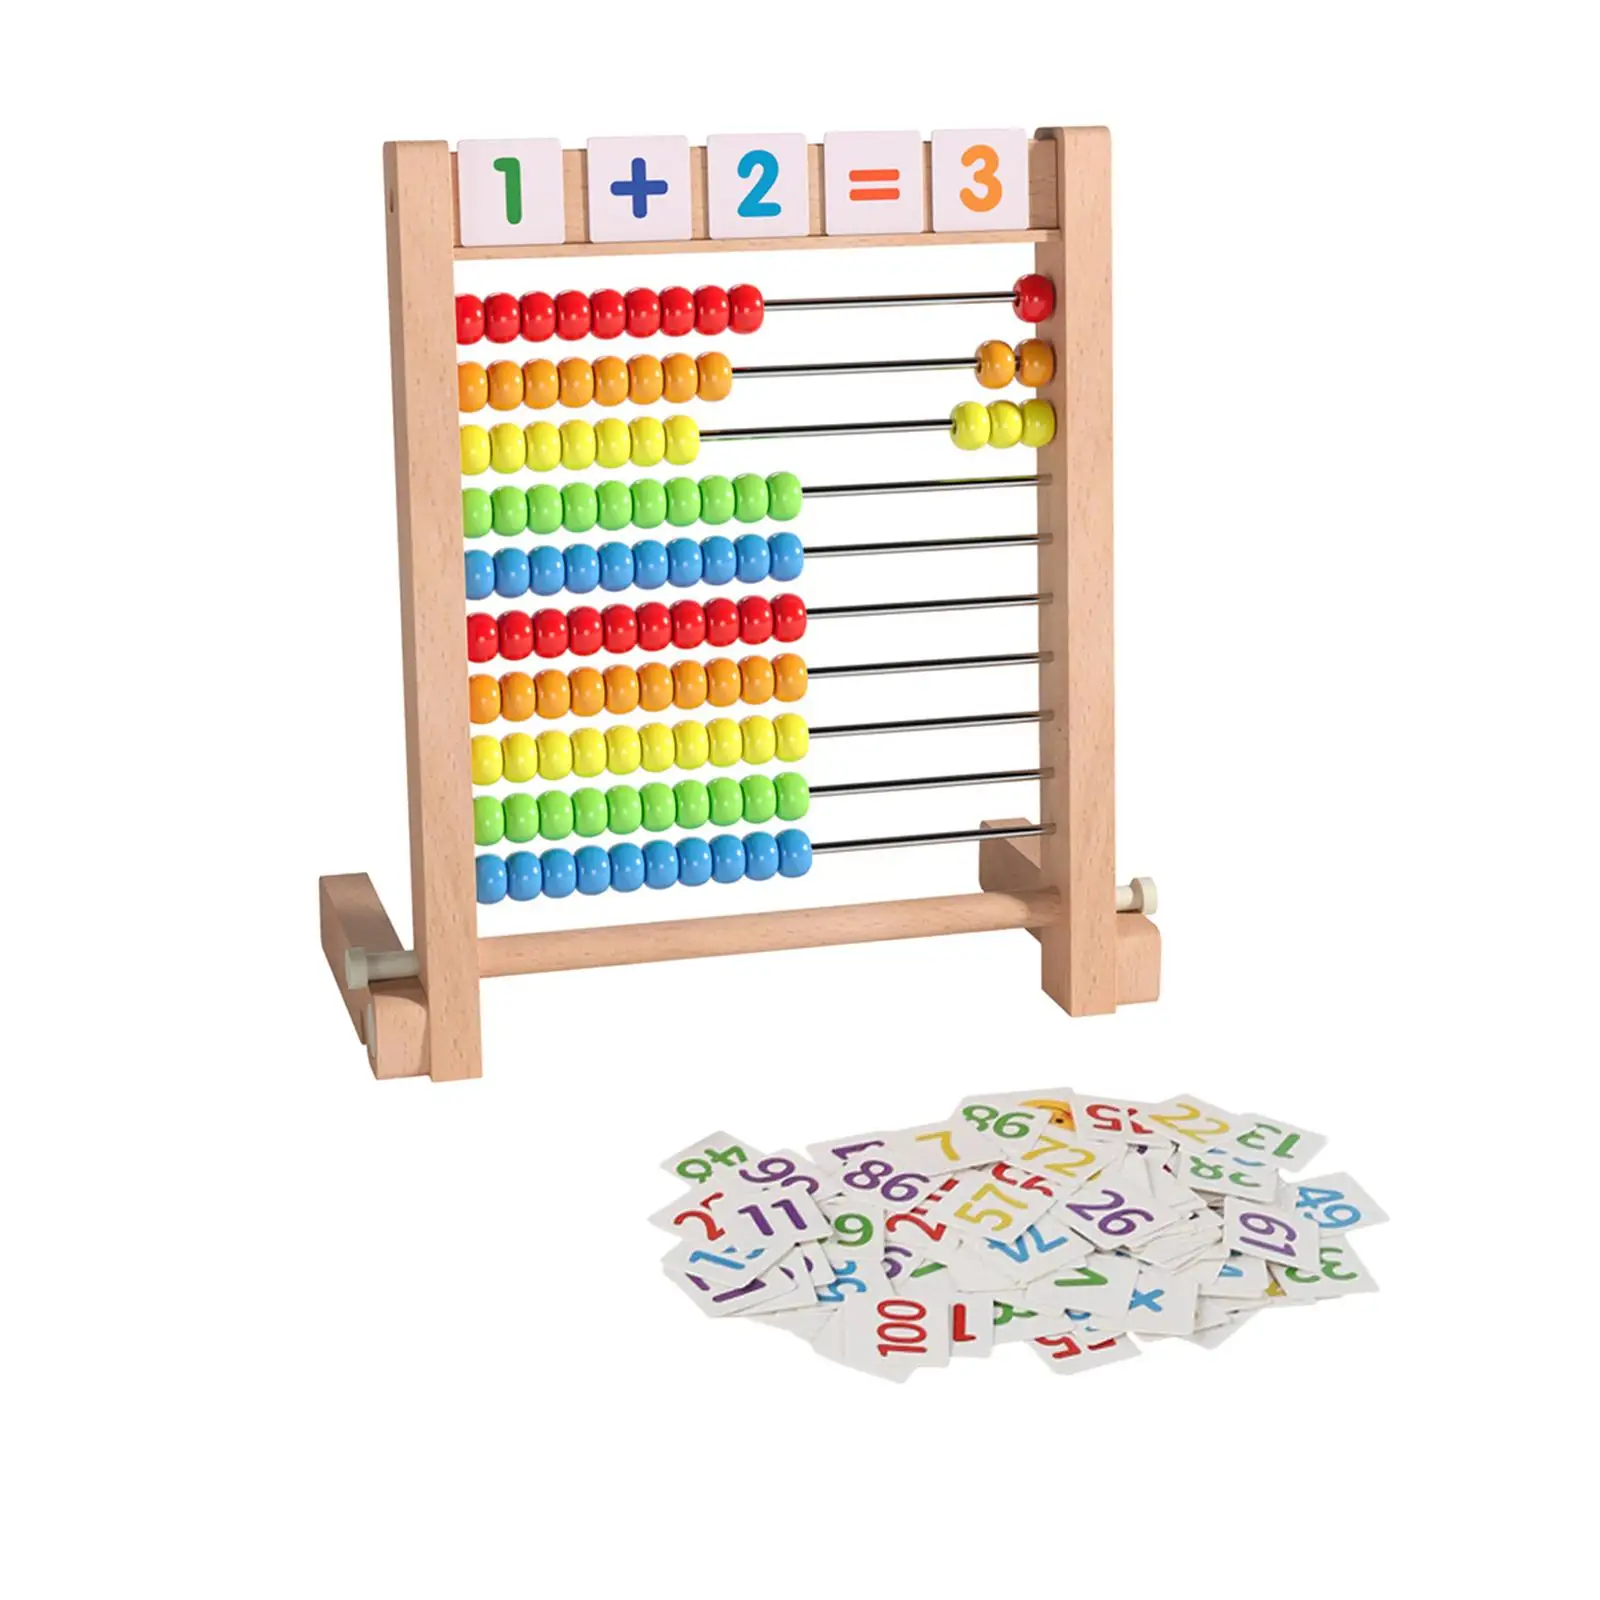 Add Subtract Abacus Ten Frame Set Smooth Edges Educational Counting Toy for Children Preschool Interactive Toys Learning Gifts